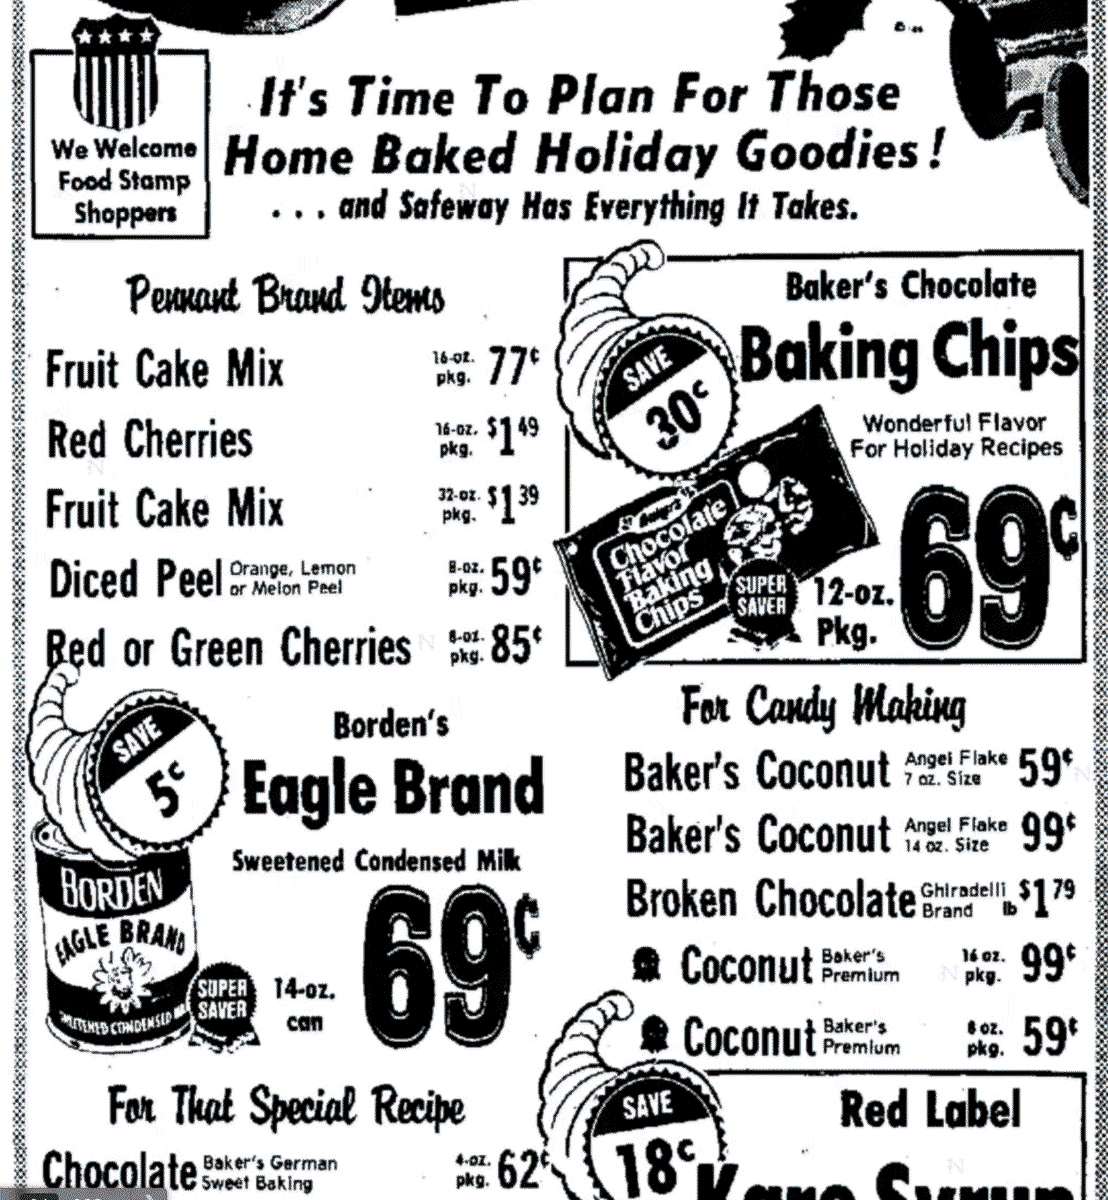 Baker’s 1976 prices: Ads for Baker’s Coconut and Baker’s Chocolate from the Pocatello, Idaho edition of the Idaho State Journal, November 3, 1976.; seventies; 1970s; Baker’s Coconut; Idaho; Safeway